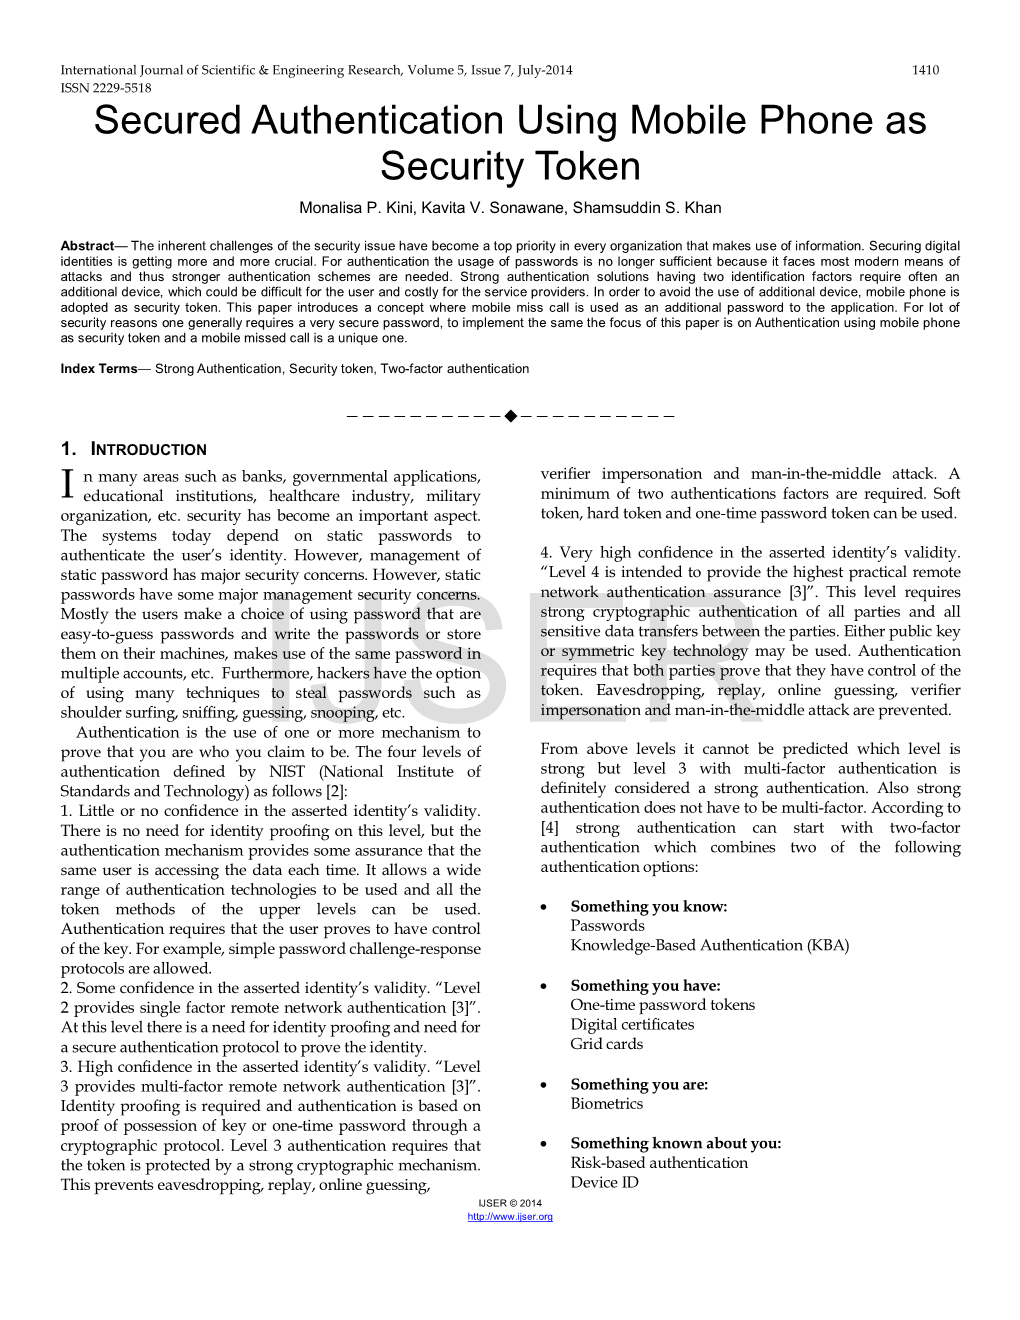 Secured Authentication Using Mobile Phone As Security Token Monalisa P